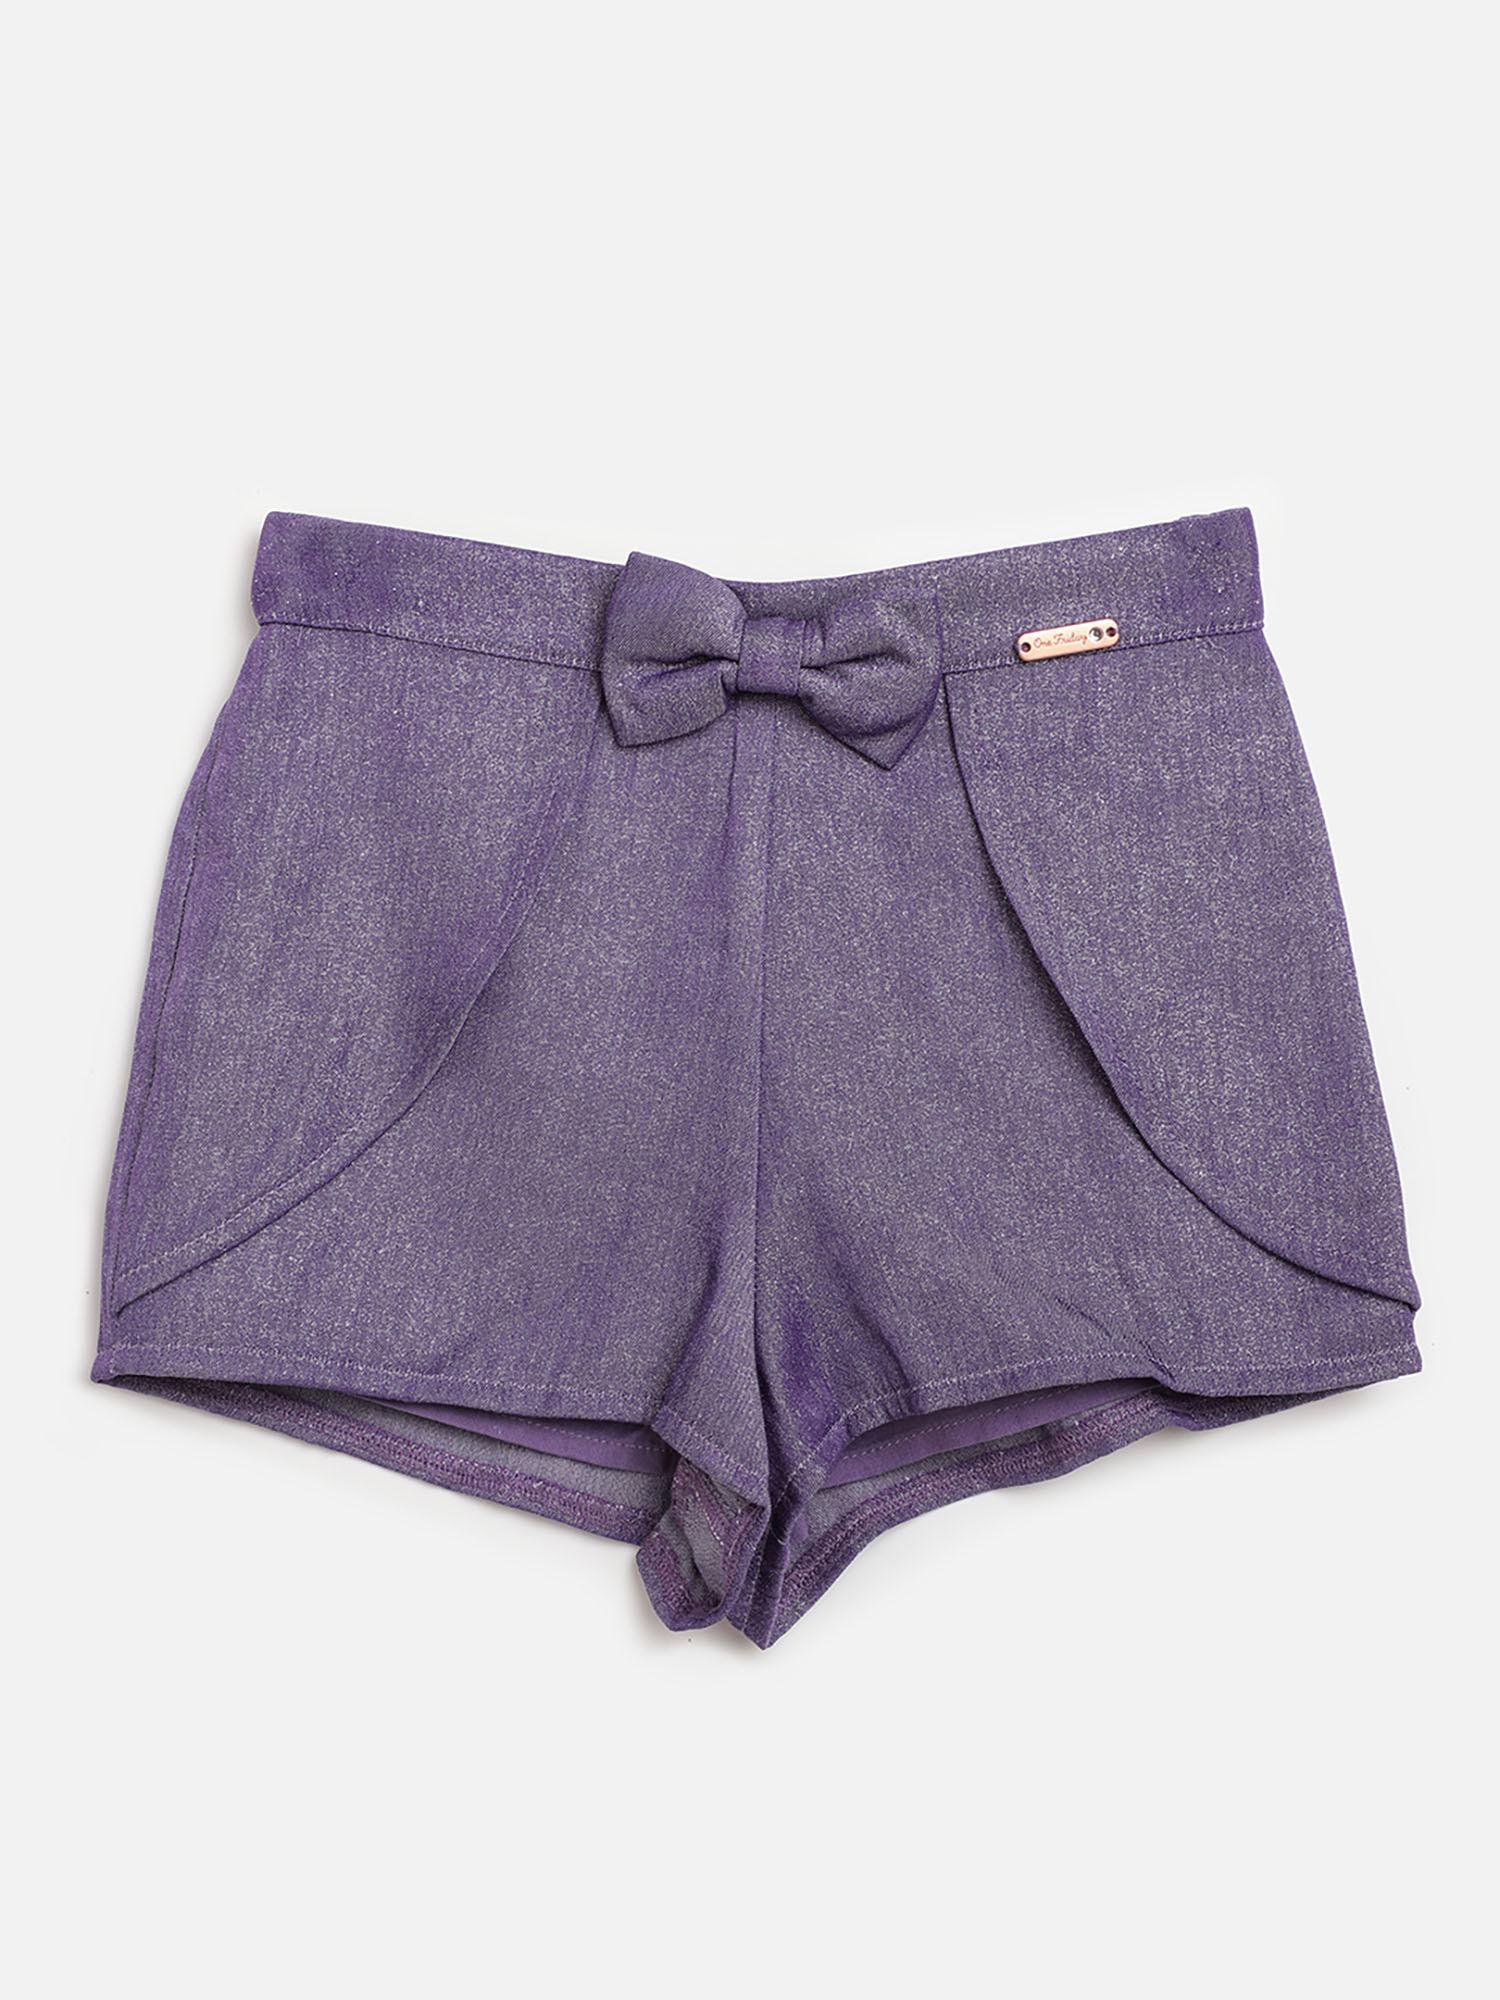 fashion-casual-girls-polyester-solid-lavender-shorts